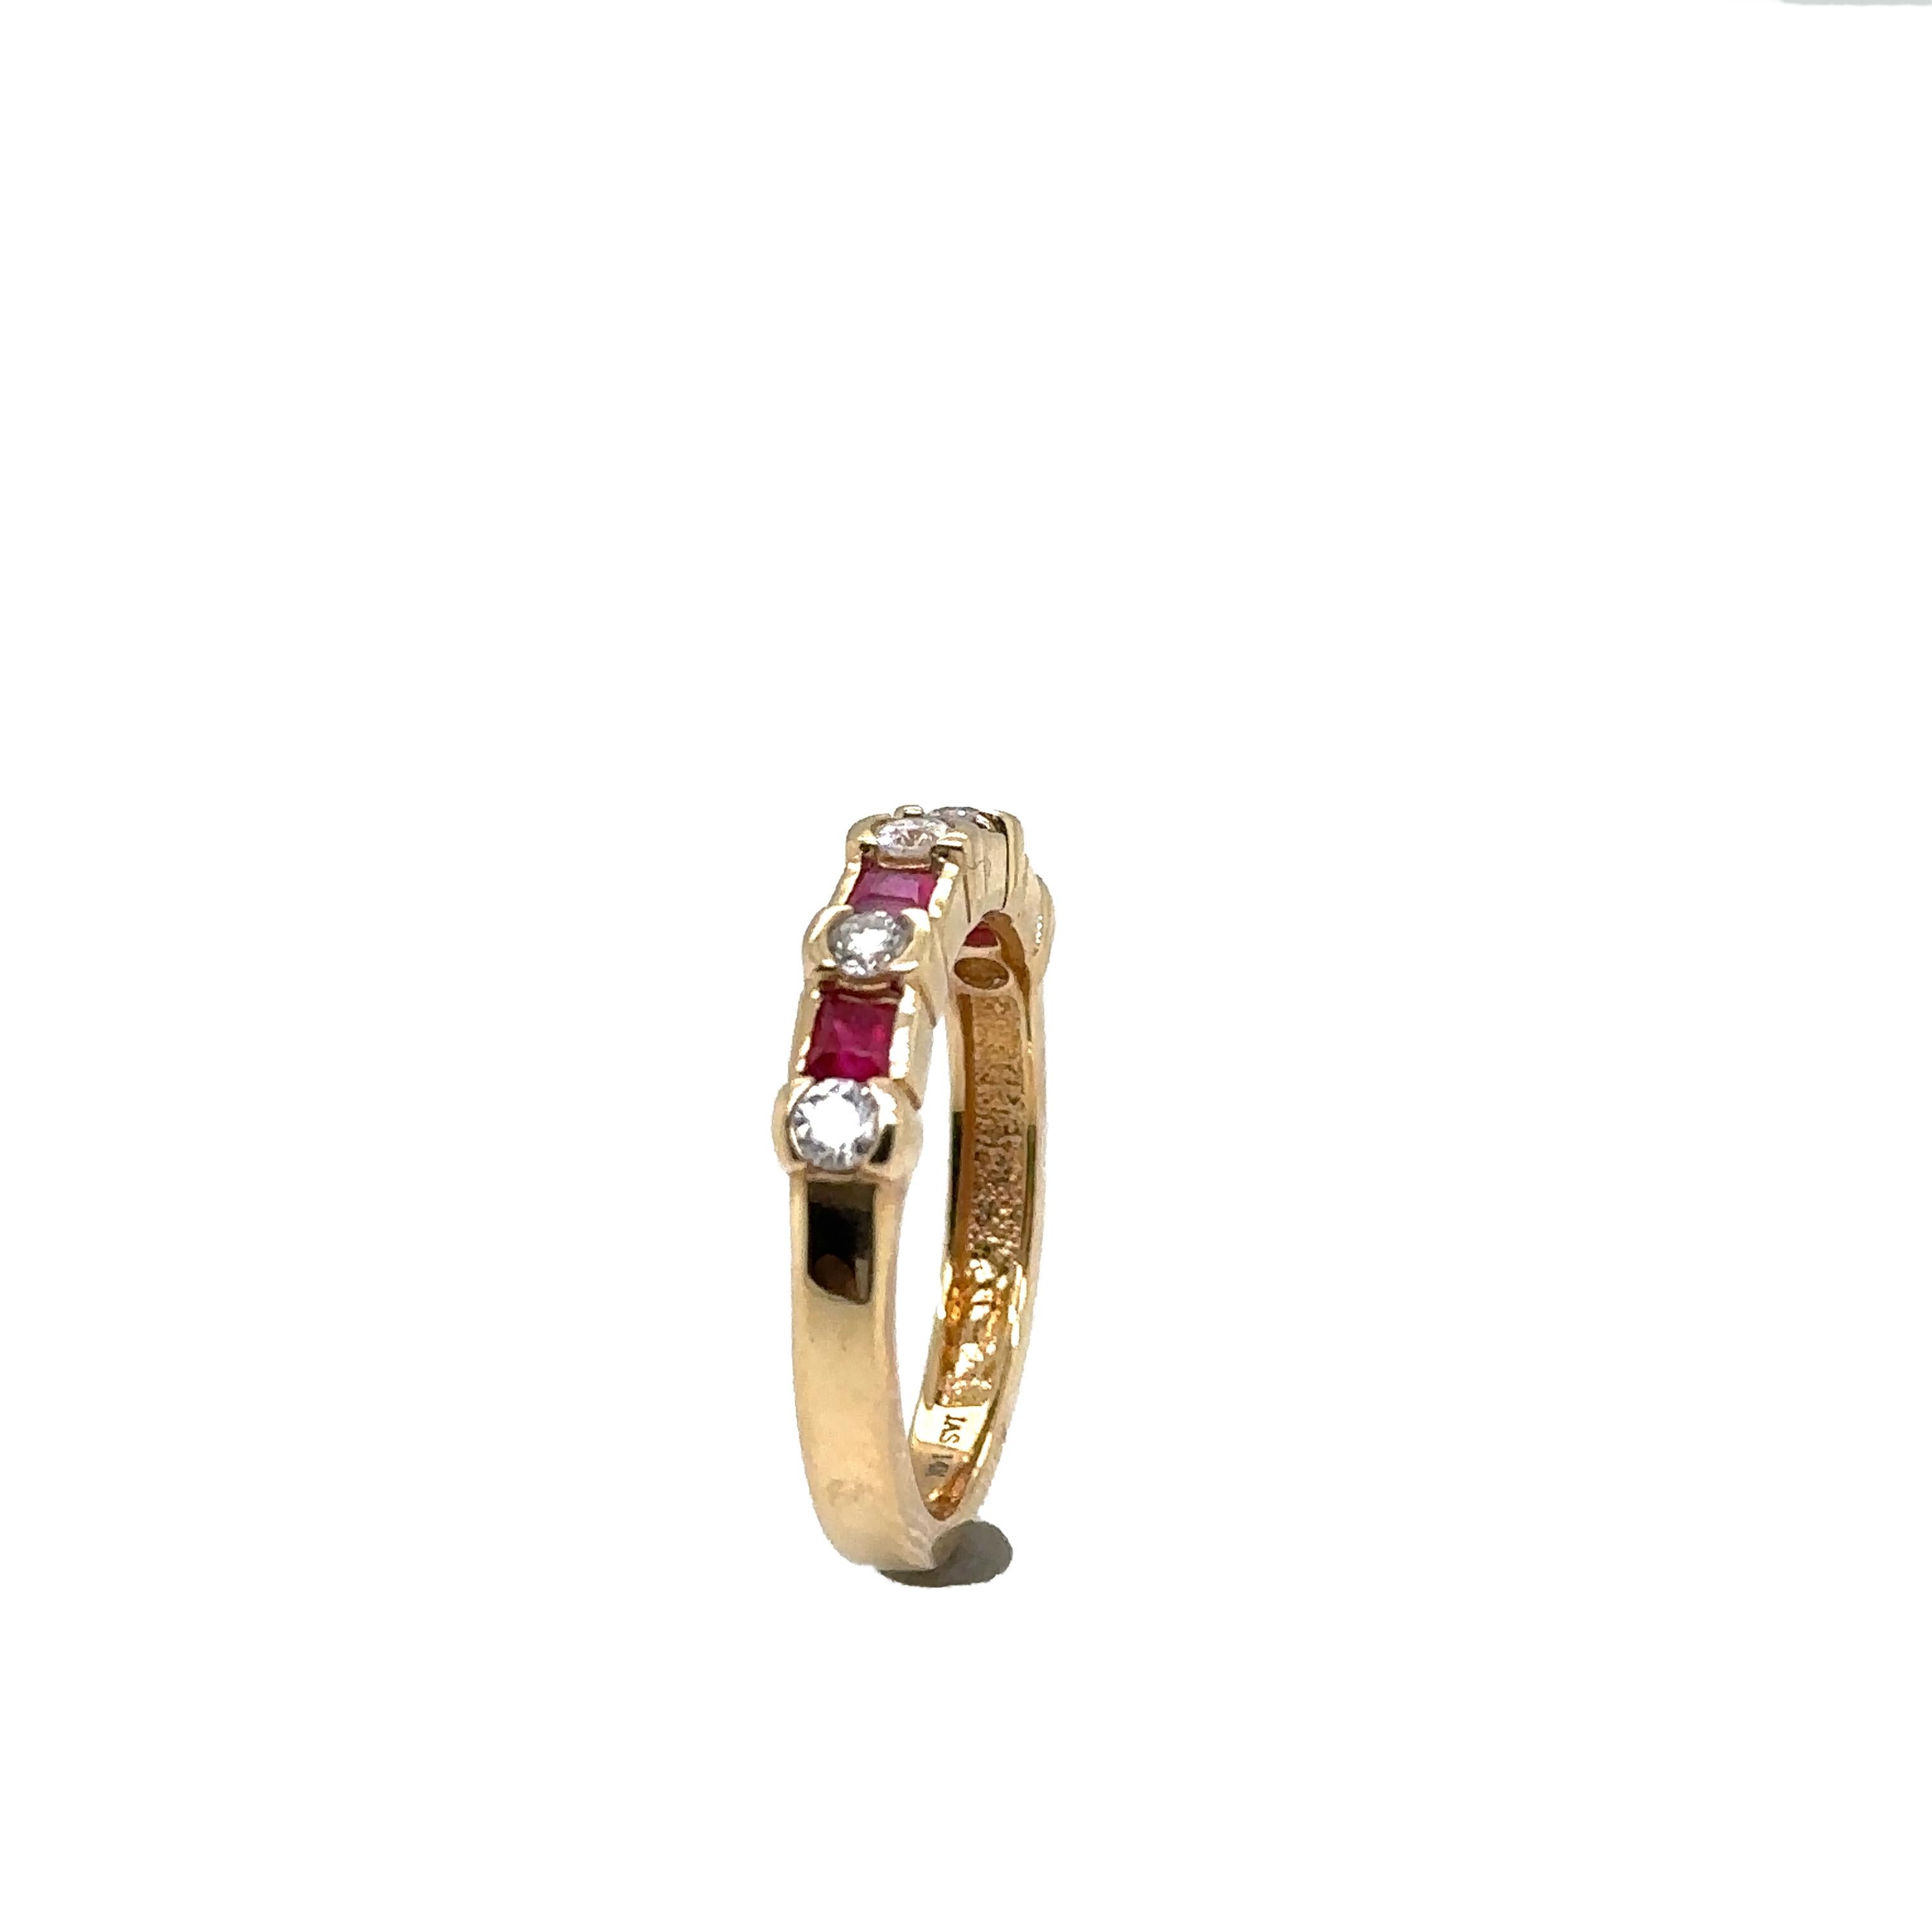 Modern JAS-21-2221 - 14K YELLOW GOLD 0.35Ct GH-SI1 DIAS AND 0.40CT PRINCESS CUT RUBIES For Sale